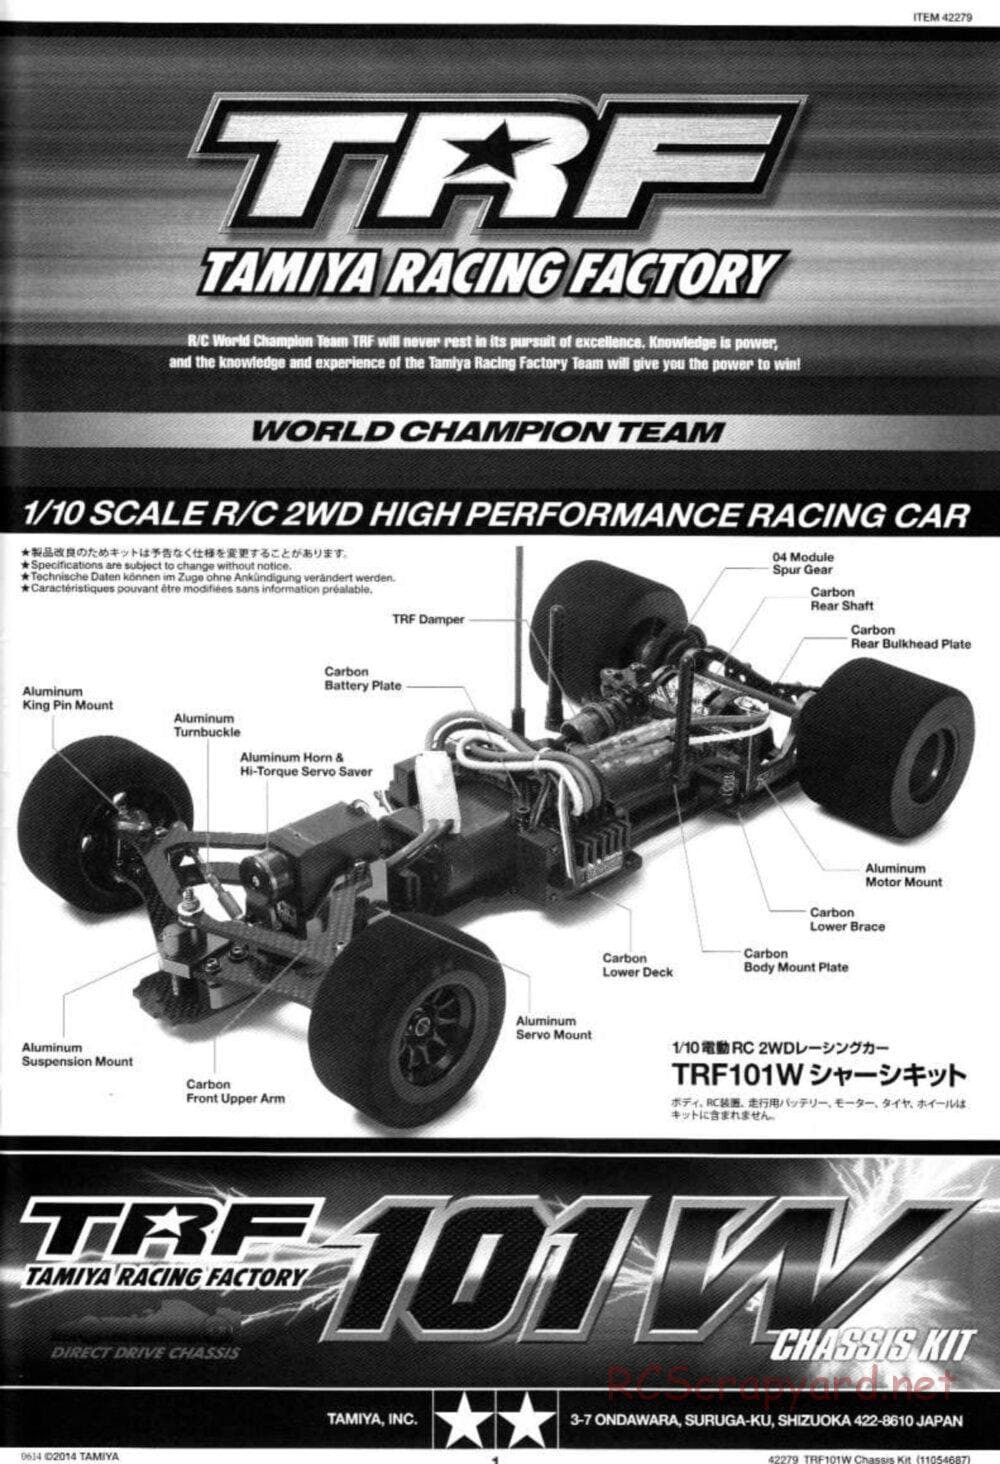 Tamiya - TRF101W Chassis Chassis - Manual - Page 1